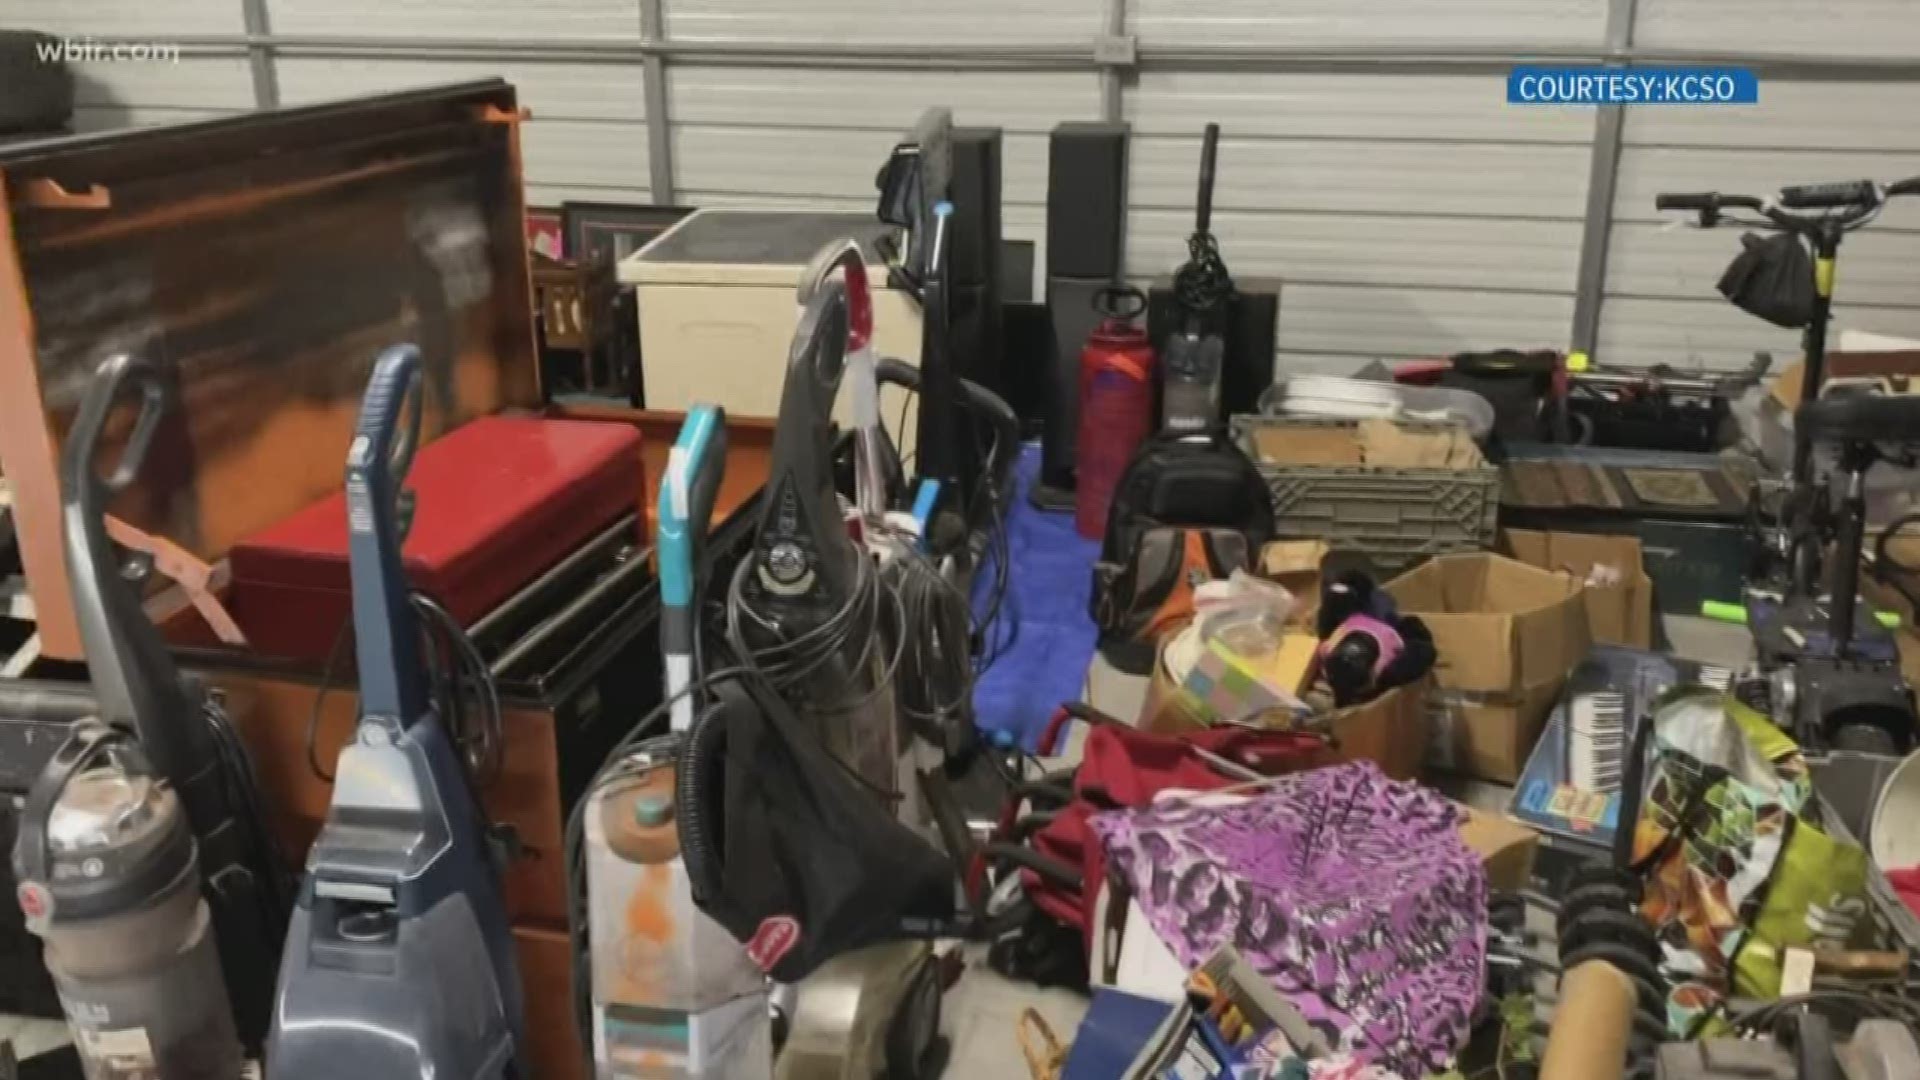 The Knox County Sheriff's Office and Knoxville Police are trying to reunite items stolen from storage units with their owners.